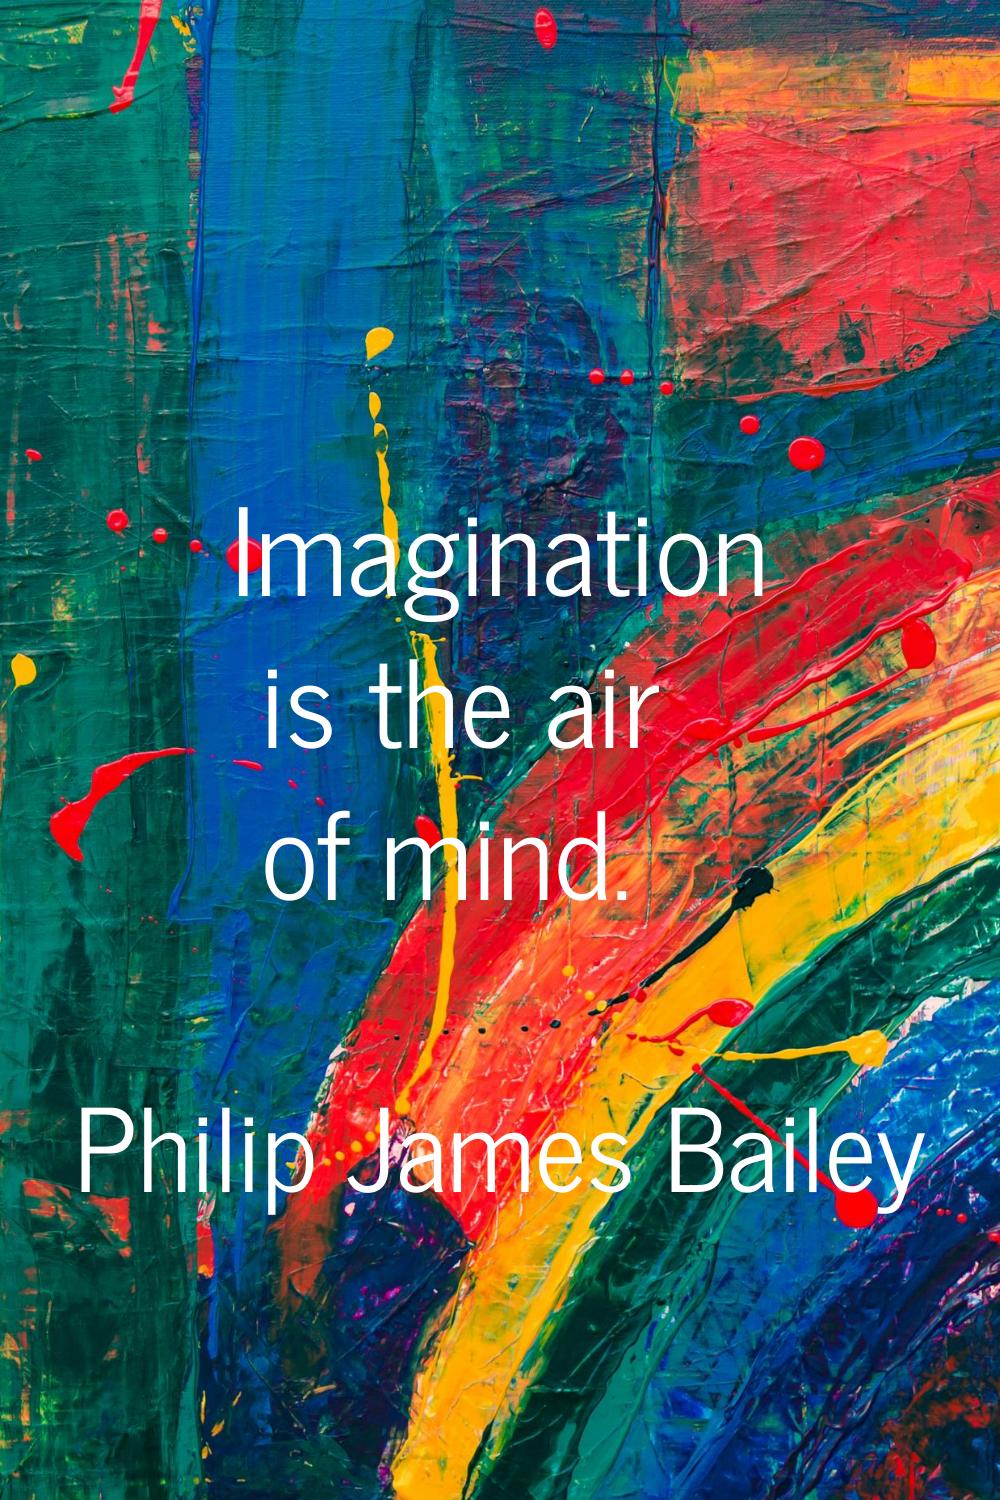 Imagination is the air of mind.